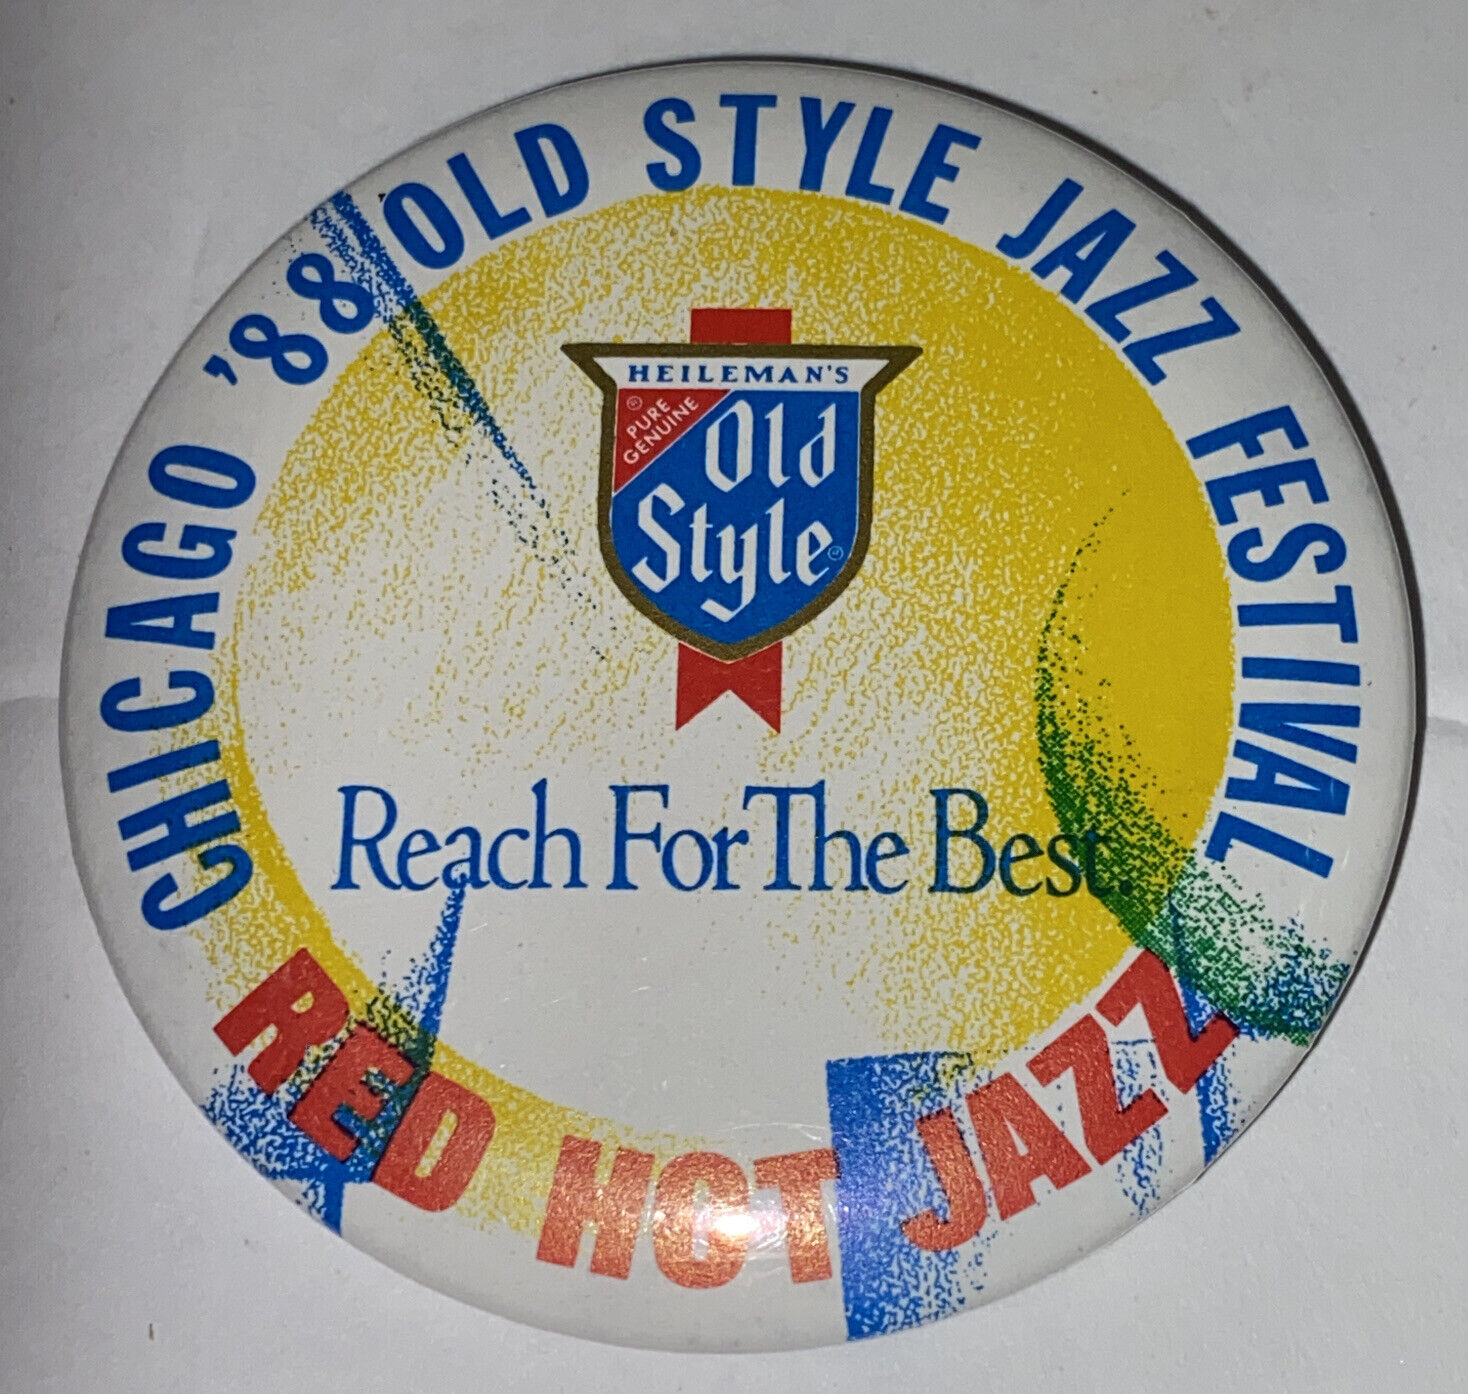 Chicago 1988 Old Style Jazz Festival Pinback Button Heileman's Old Style Beer